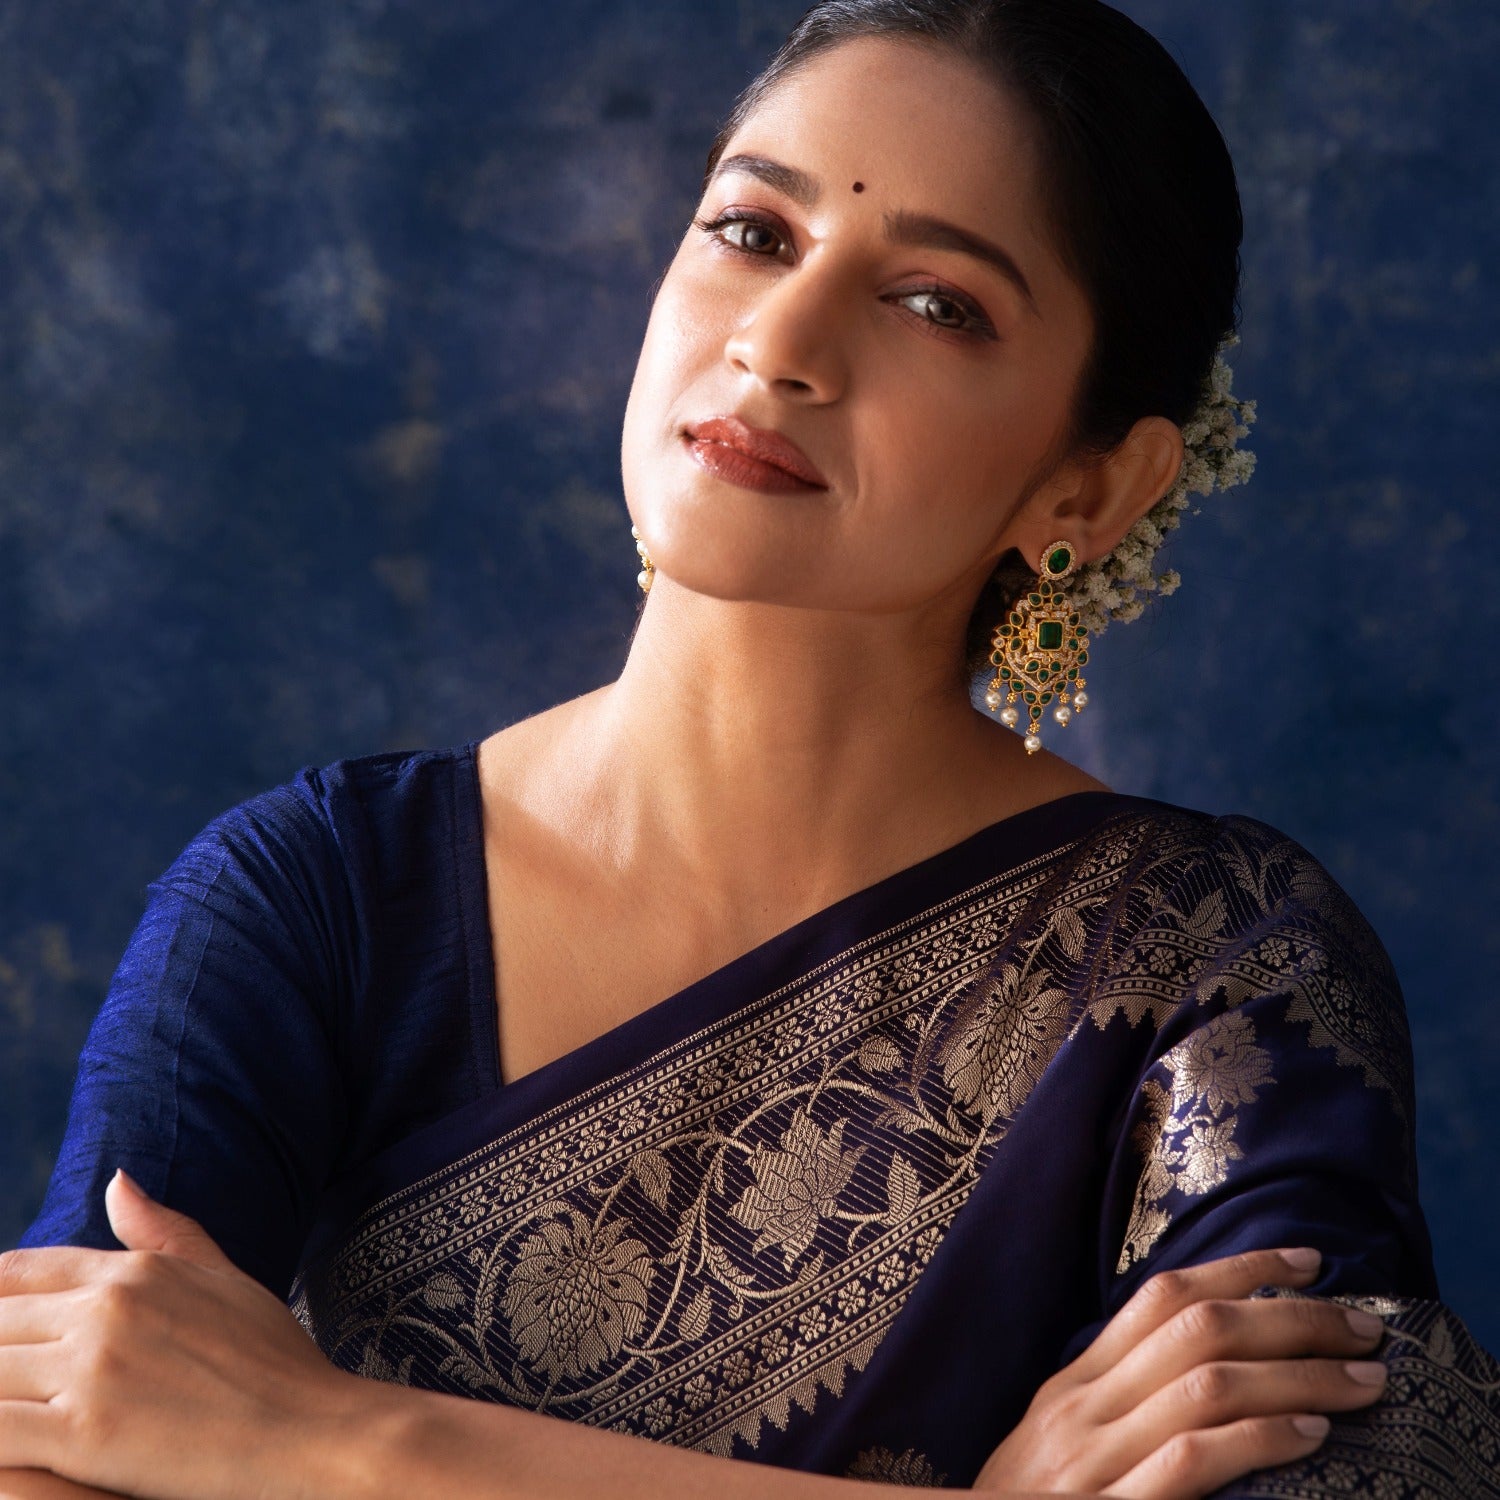 Madhuri Dixit looks effortlessly graceful in a blue saree